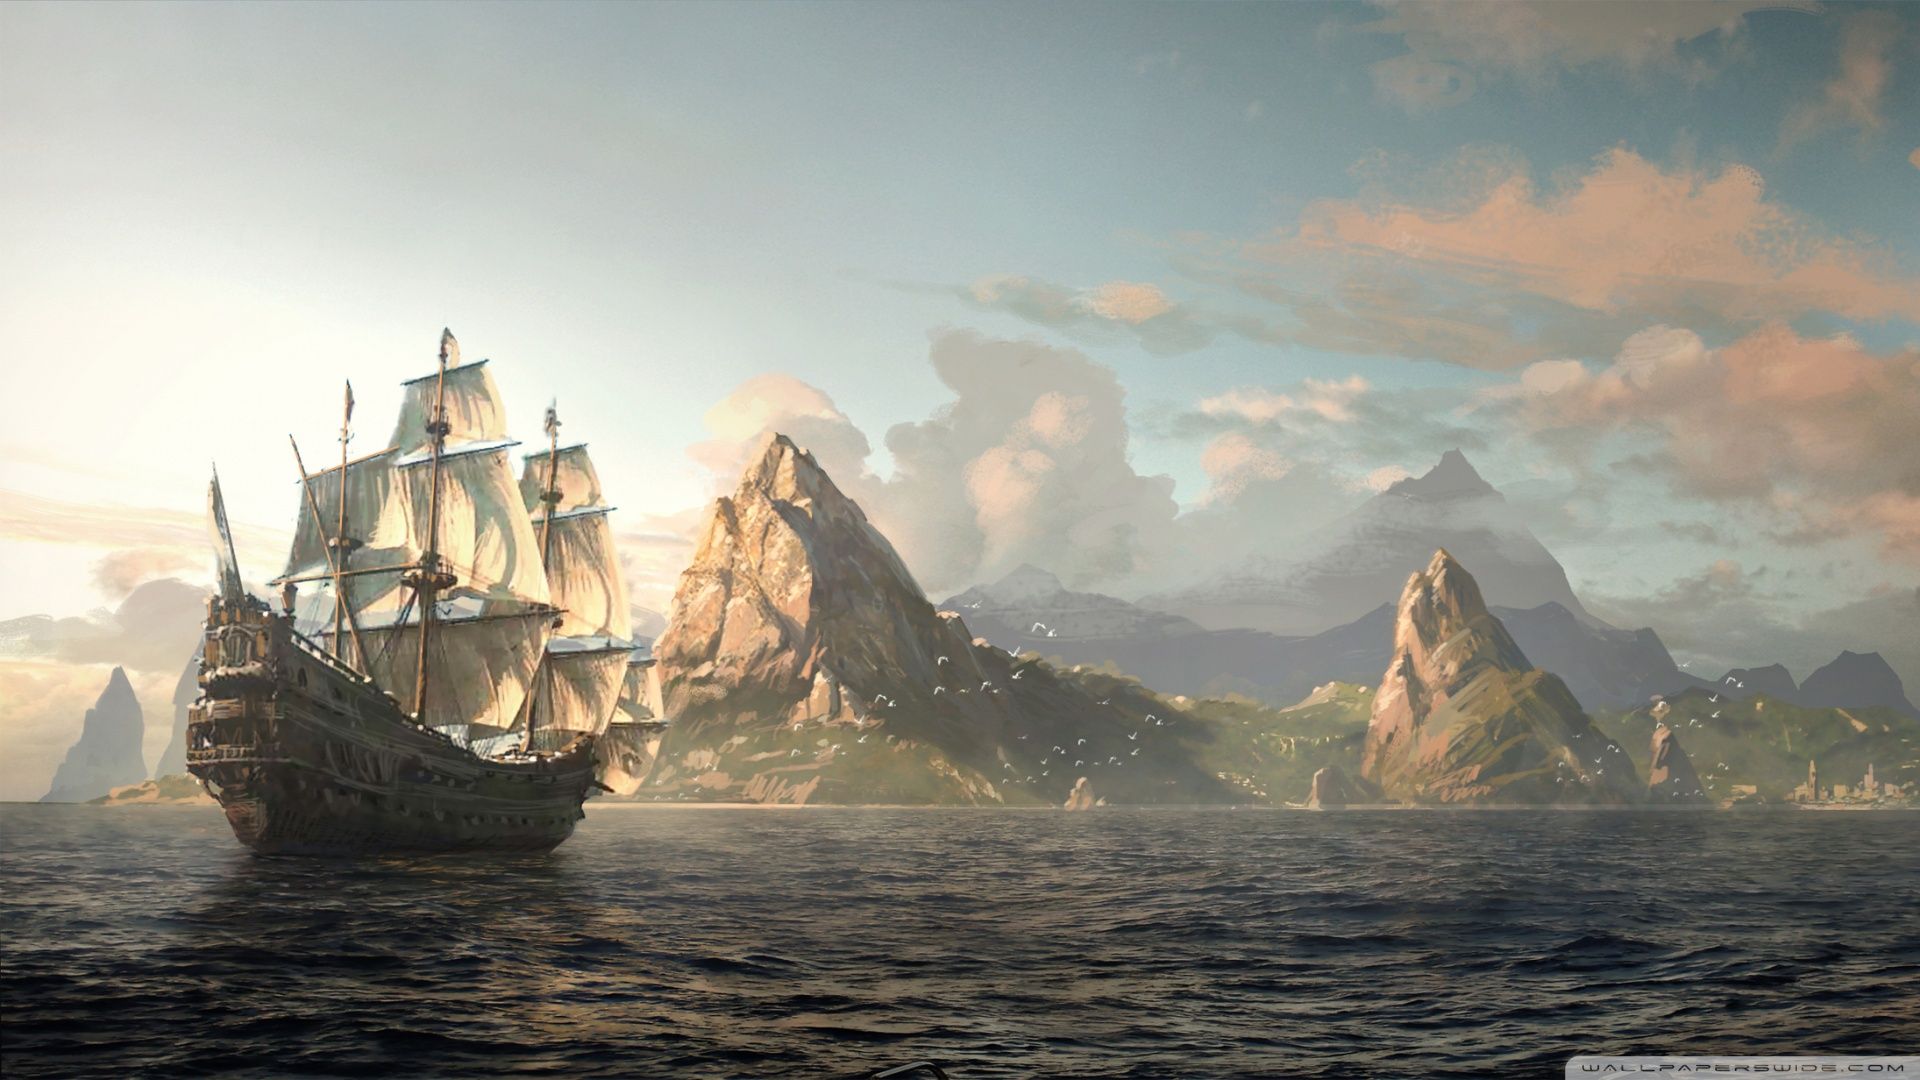 Ac4 Black Flag Wallpaper Posted By Michelle Walker